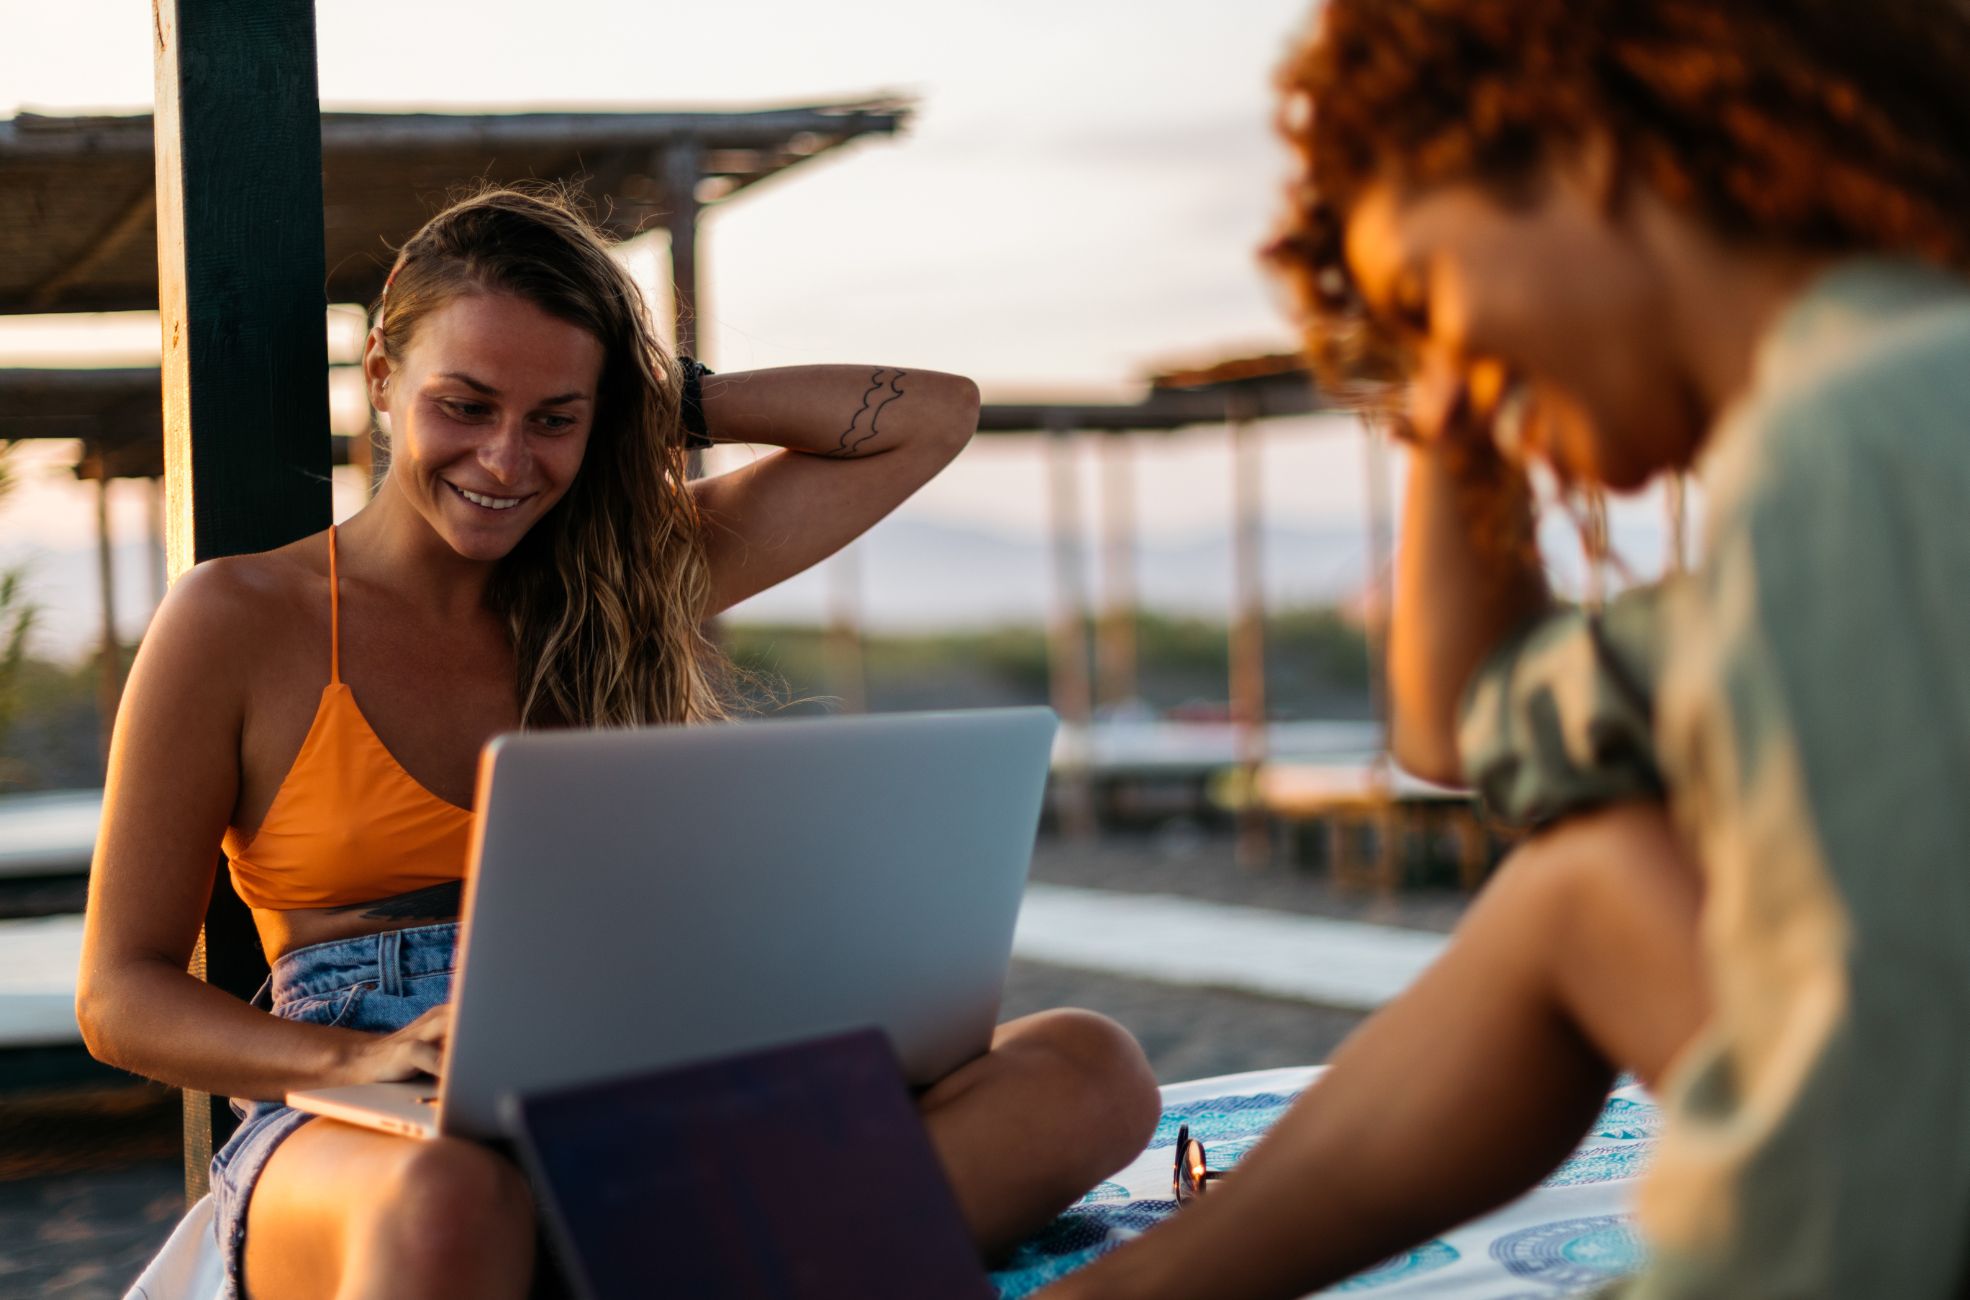 Stock Photo Of Digital Nomads Working In Spain